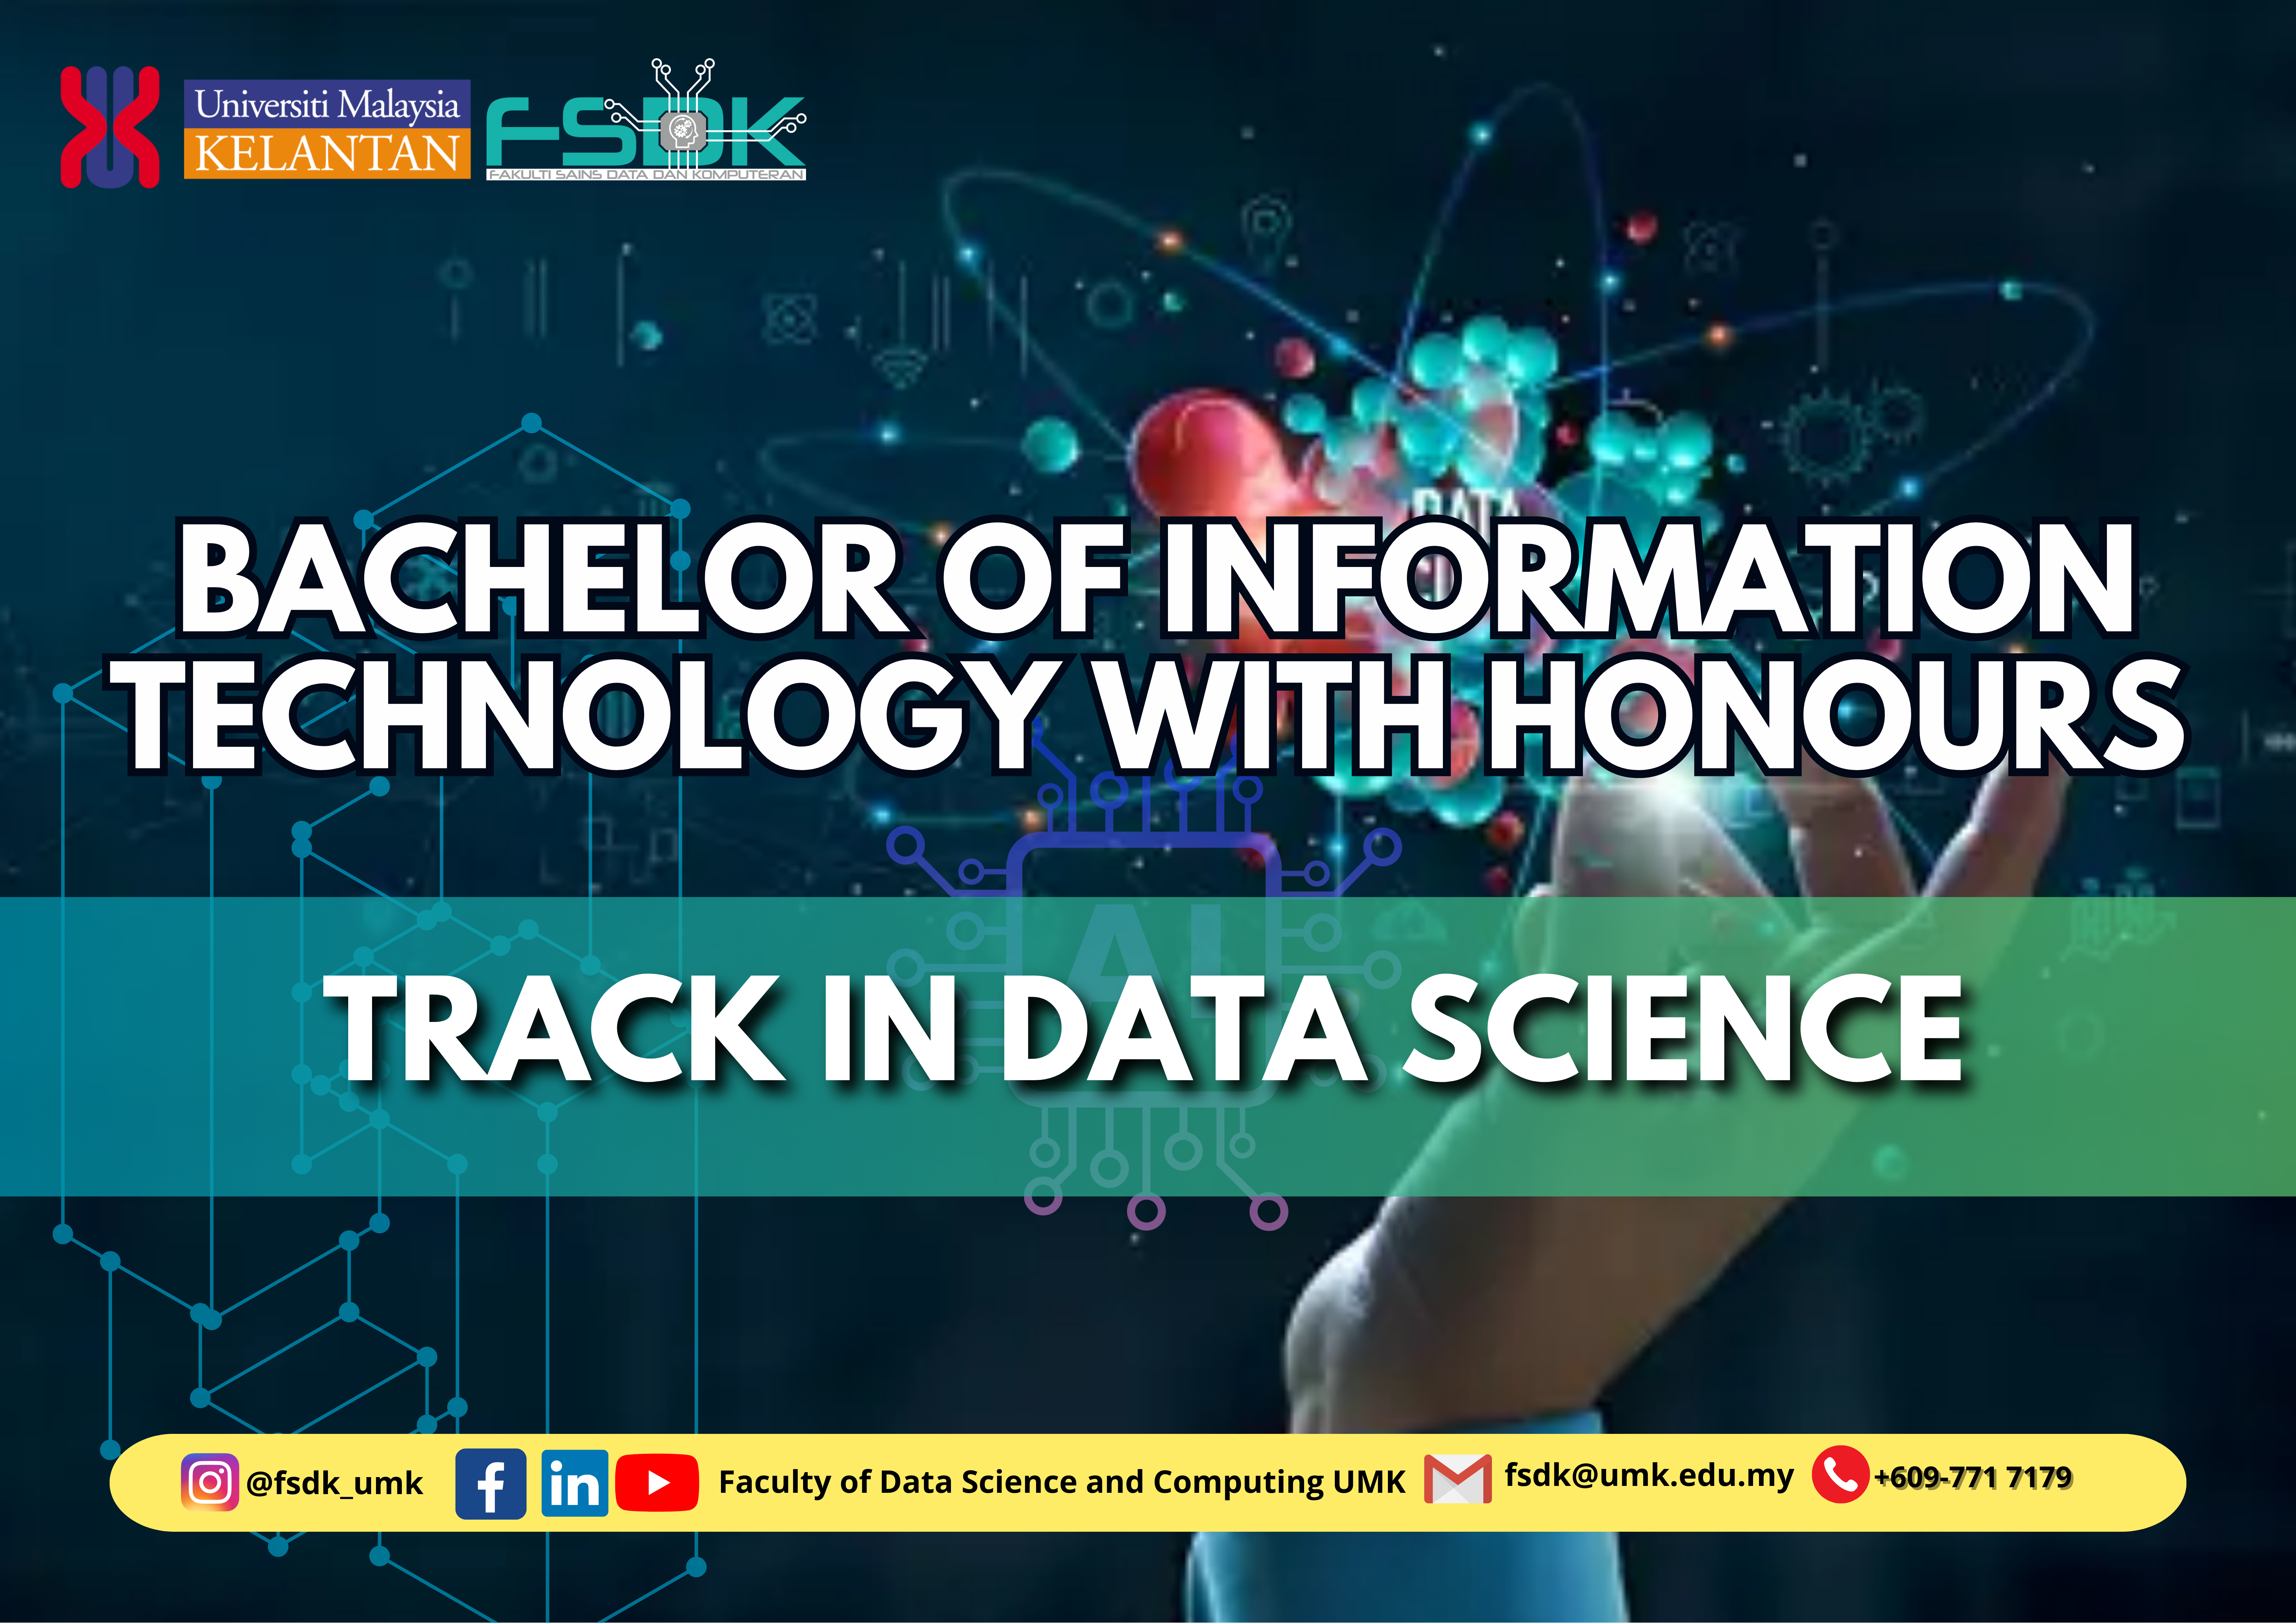 BACHELOR IN INFORMATION TECHNOLOGY WITH HONOUR (TRACK IN DATA SCIENCE)